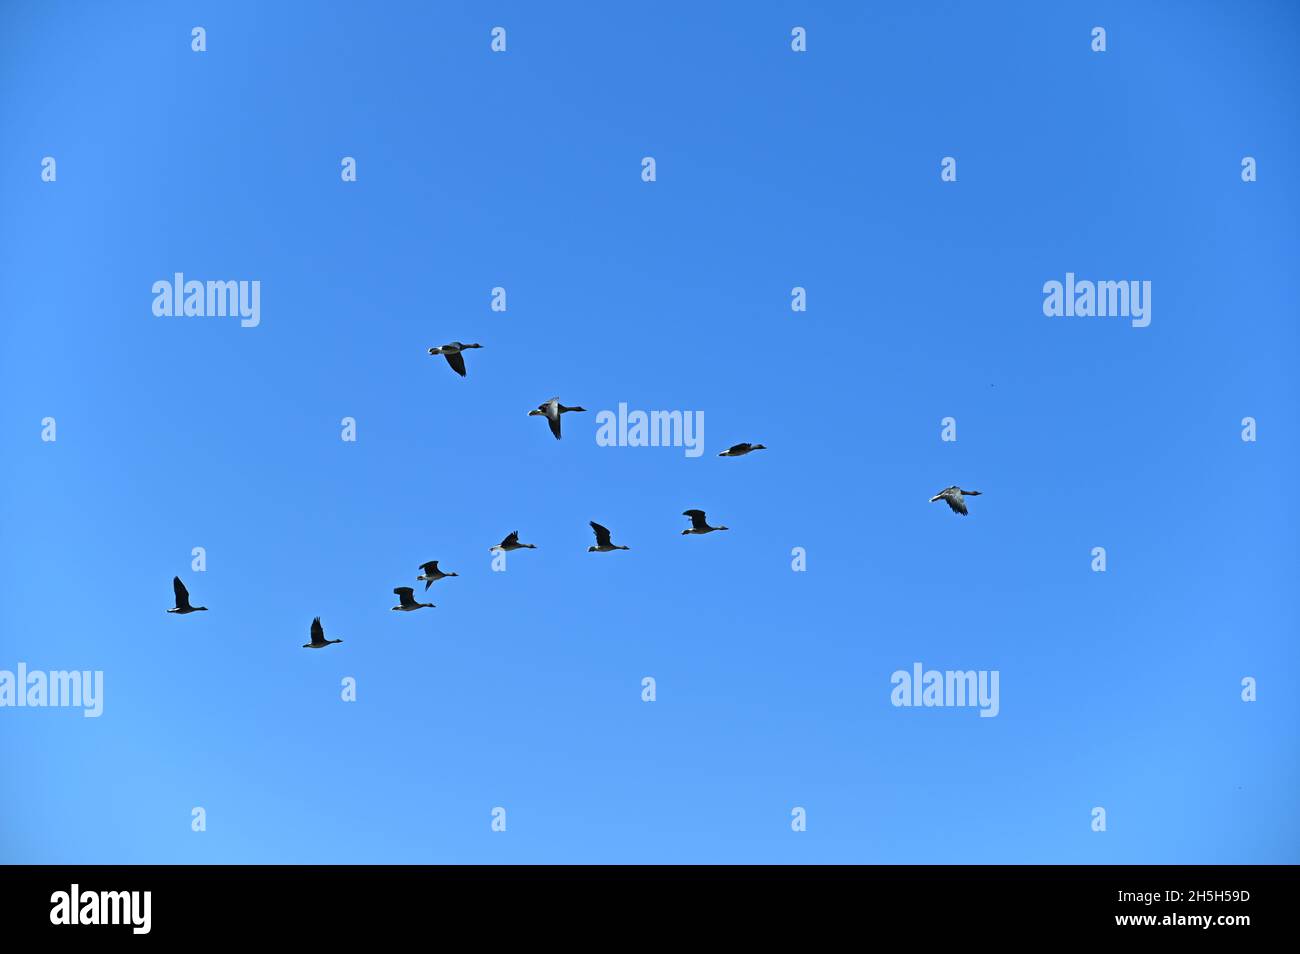 Looking at the birds flying under the clear sky, they look very free. Stock Photo